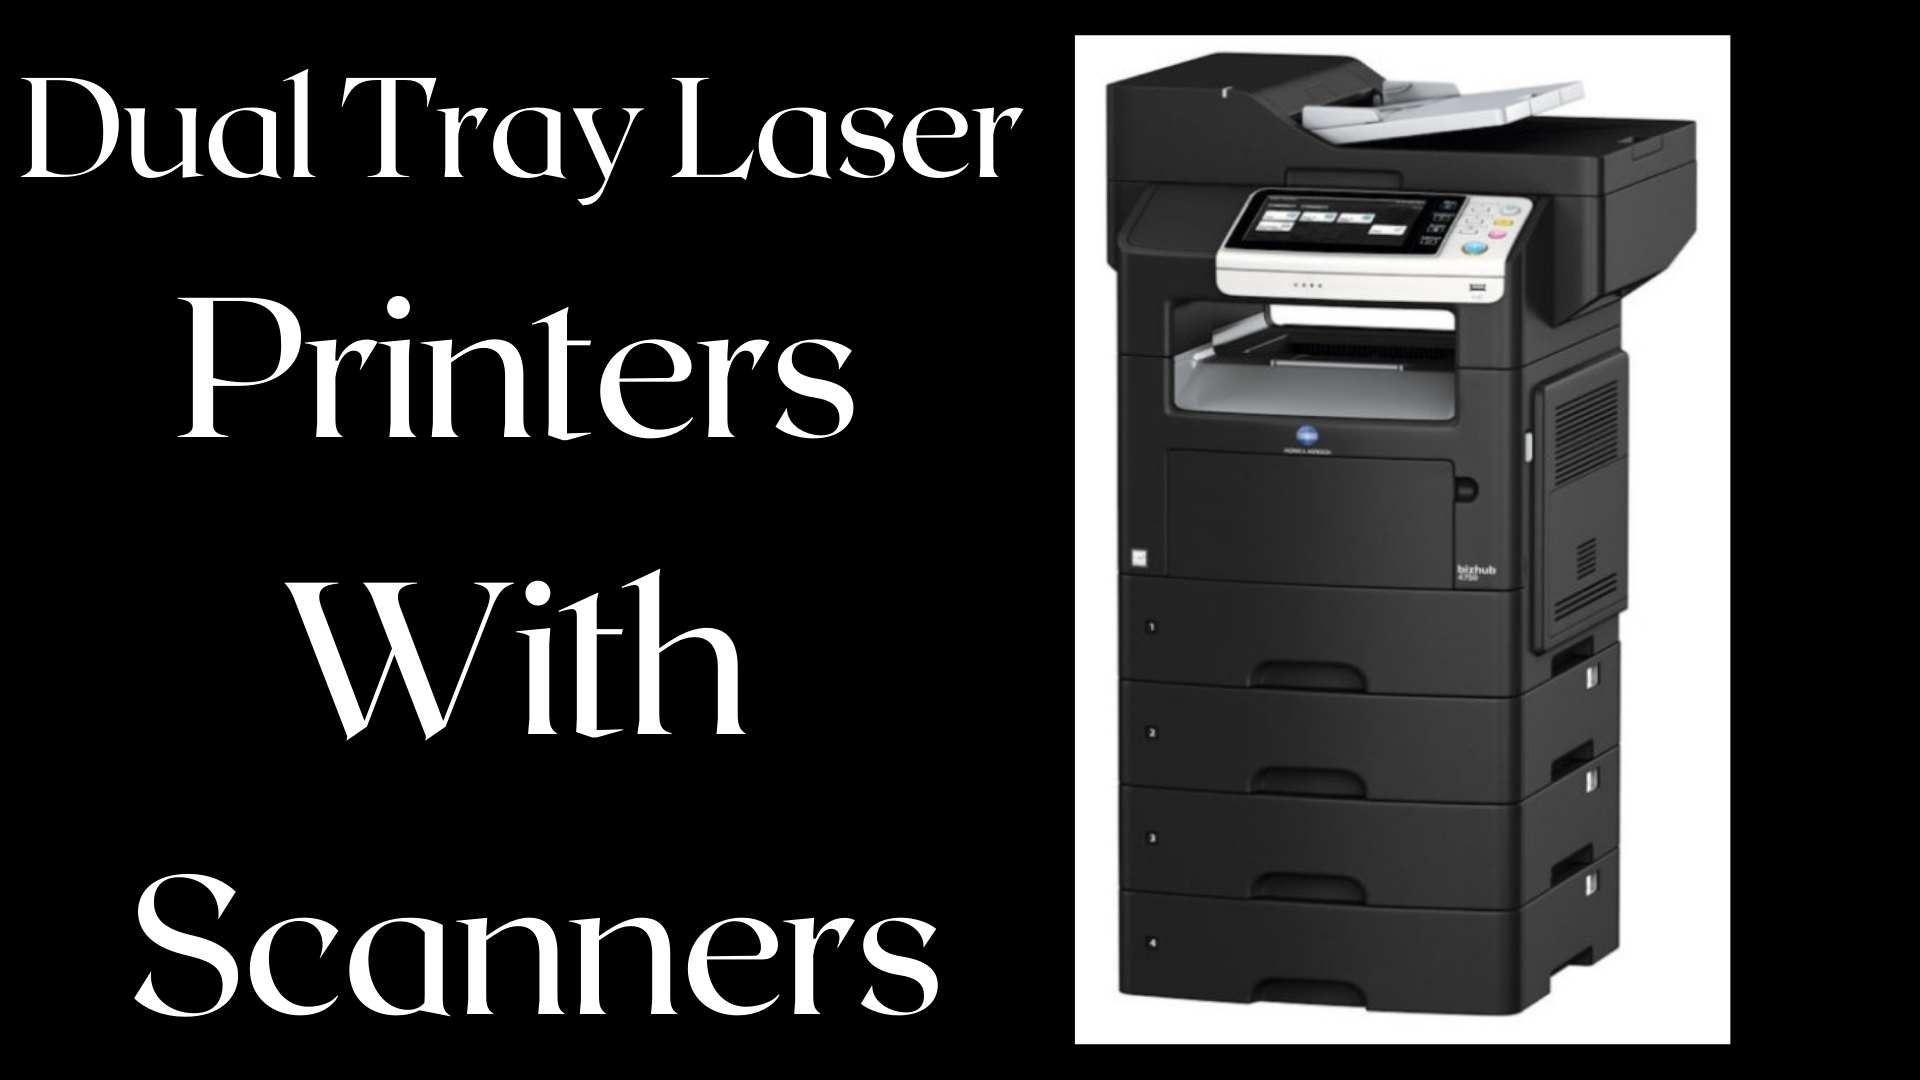 Dual Tray Laser Printers With Scanner